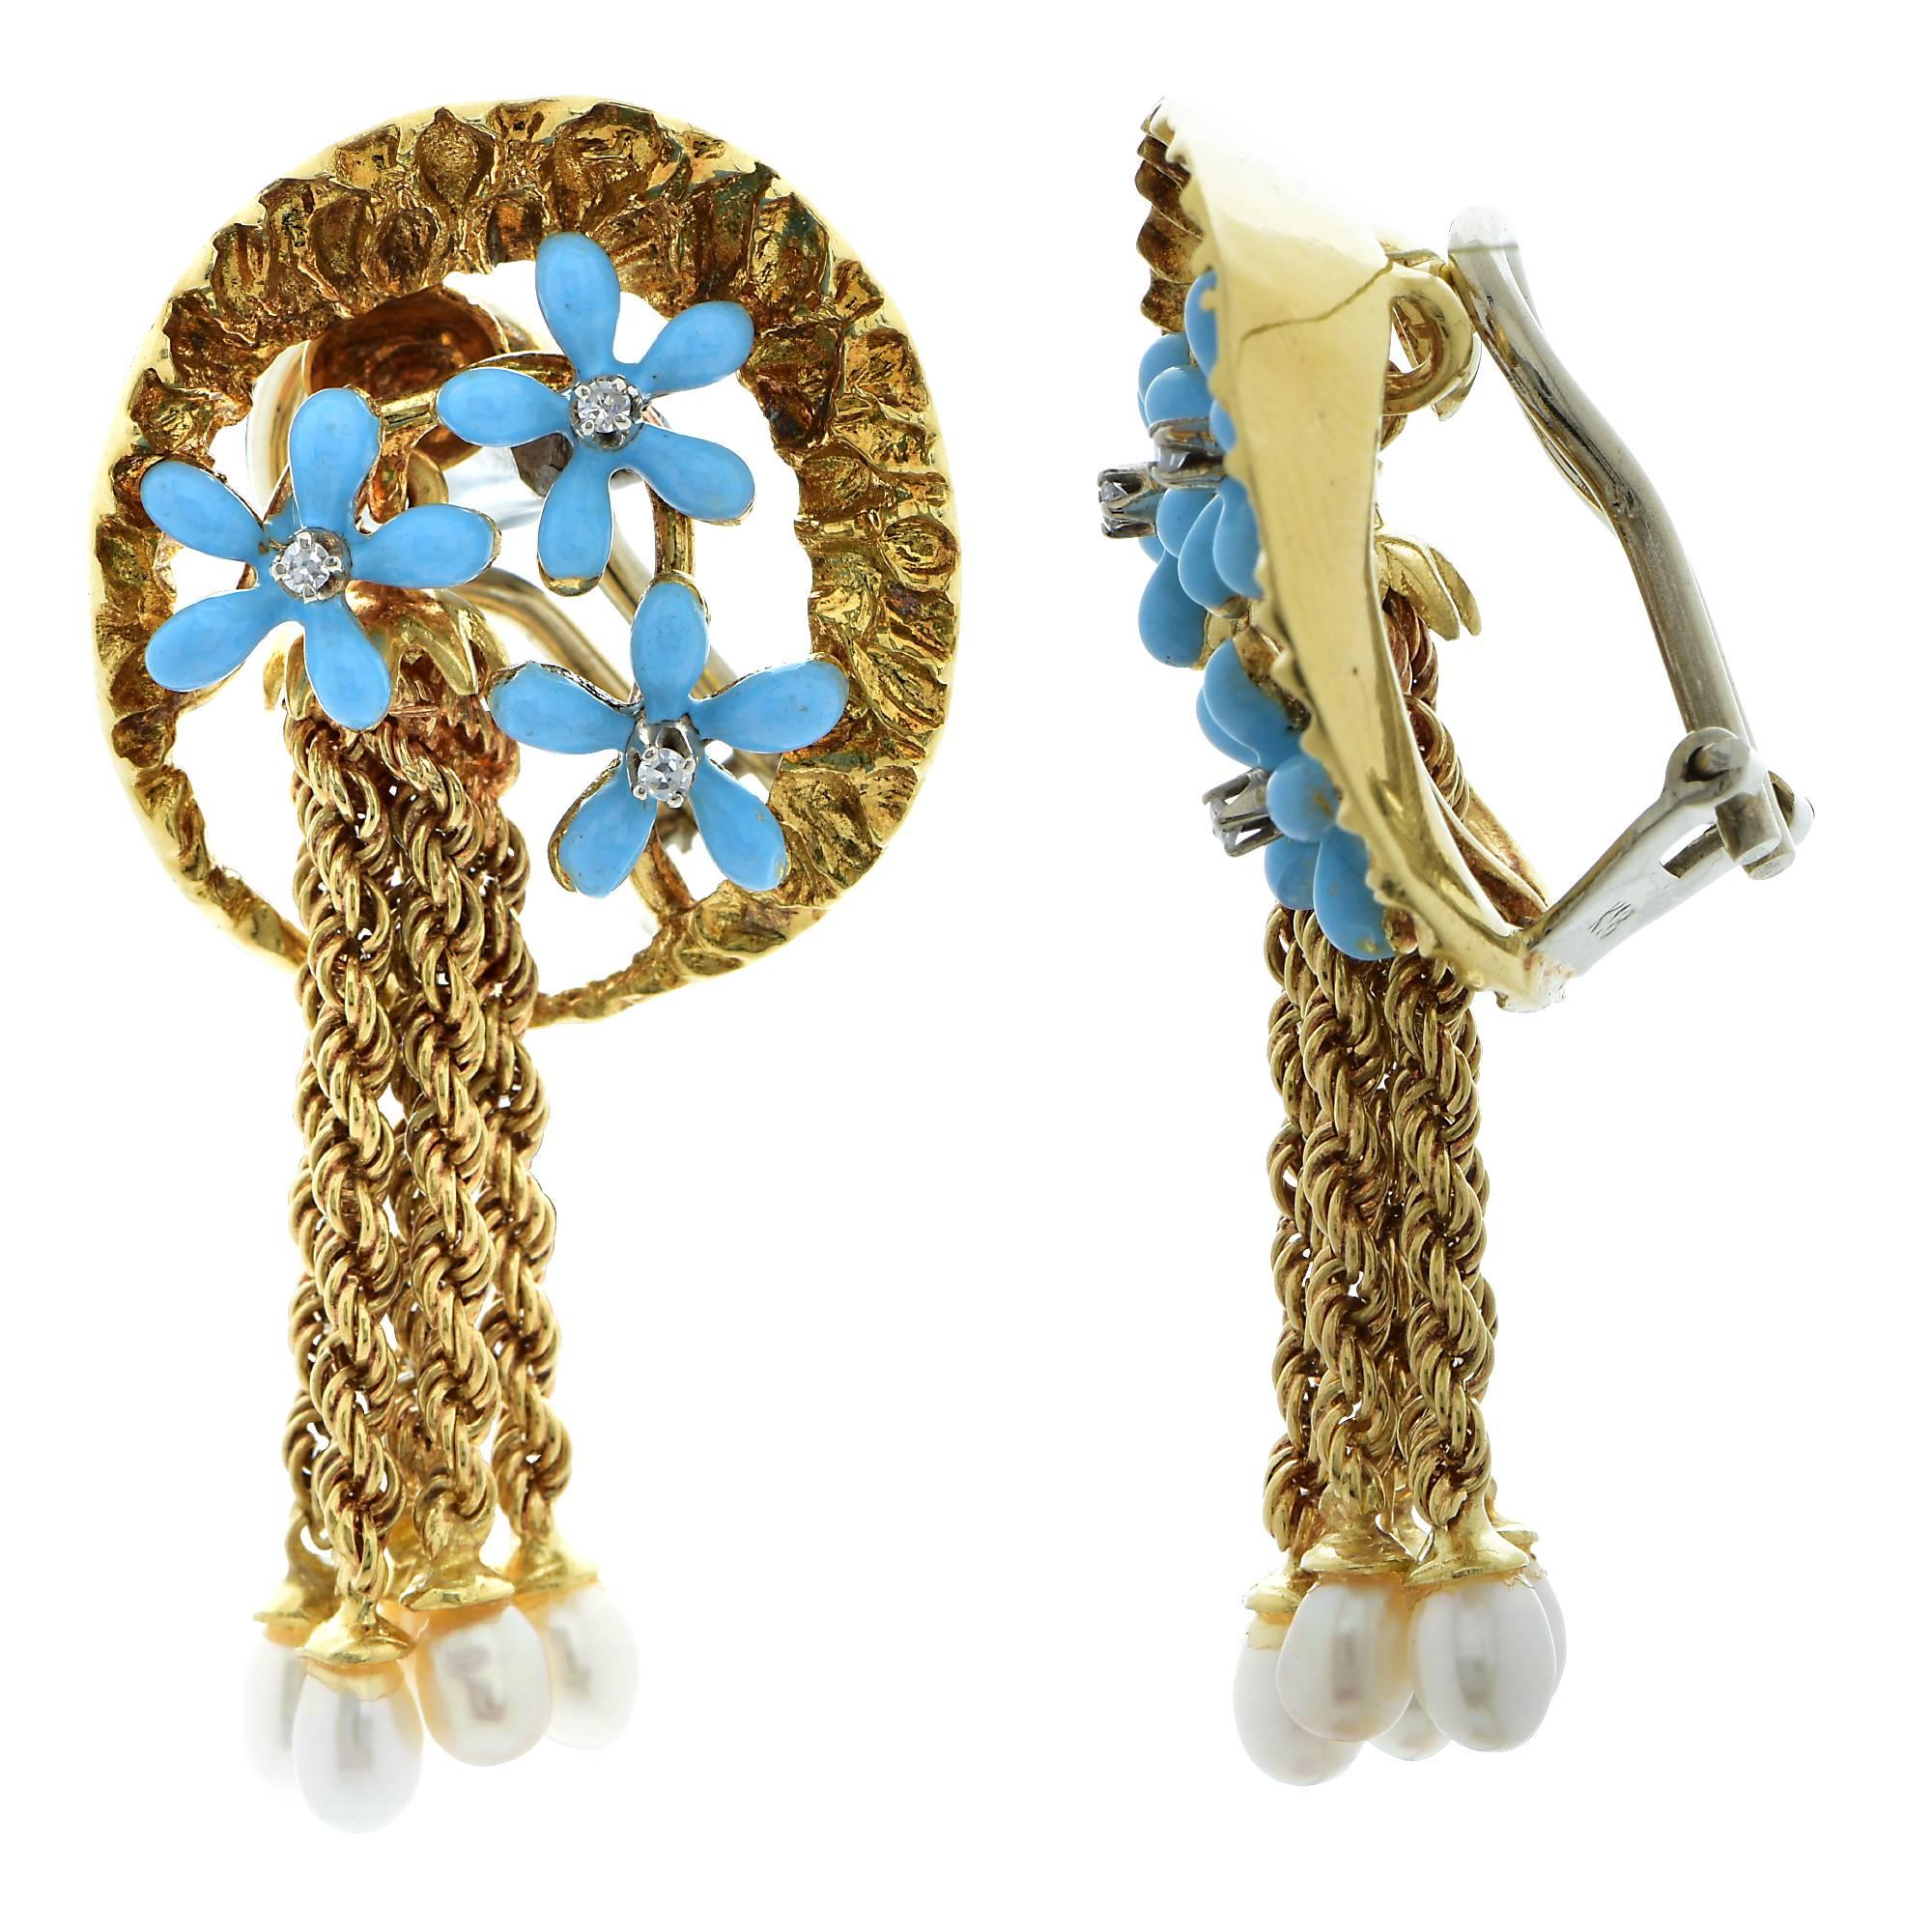 These earrings, crafted in yellow gold feature 6 sky blue enameled flowers adorned with 6 single cut diamonds weighing .06cts total G, VS-SI, Clarity. Dangling from the earrings are 10 3.2mm -3.4mm seed pearls. These fabulous earrings measure 1.7